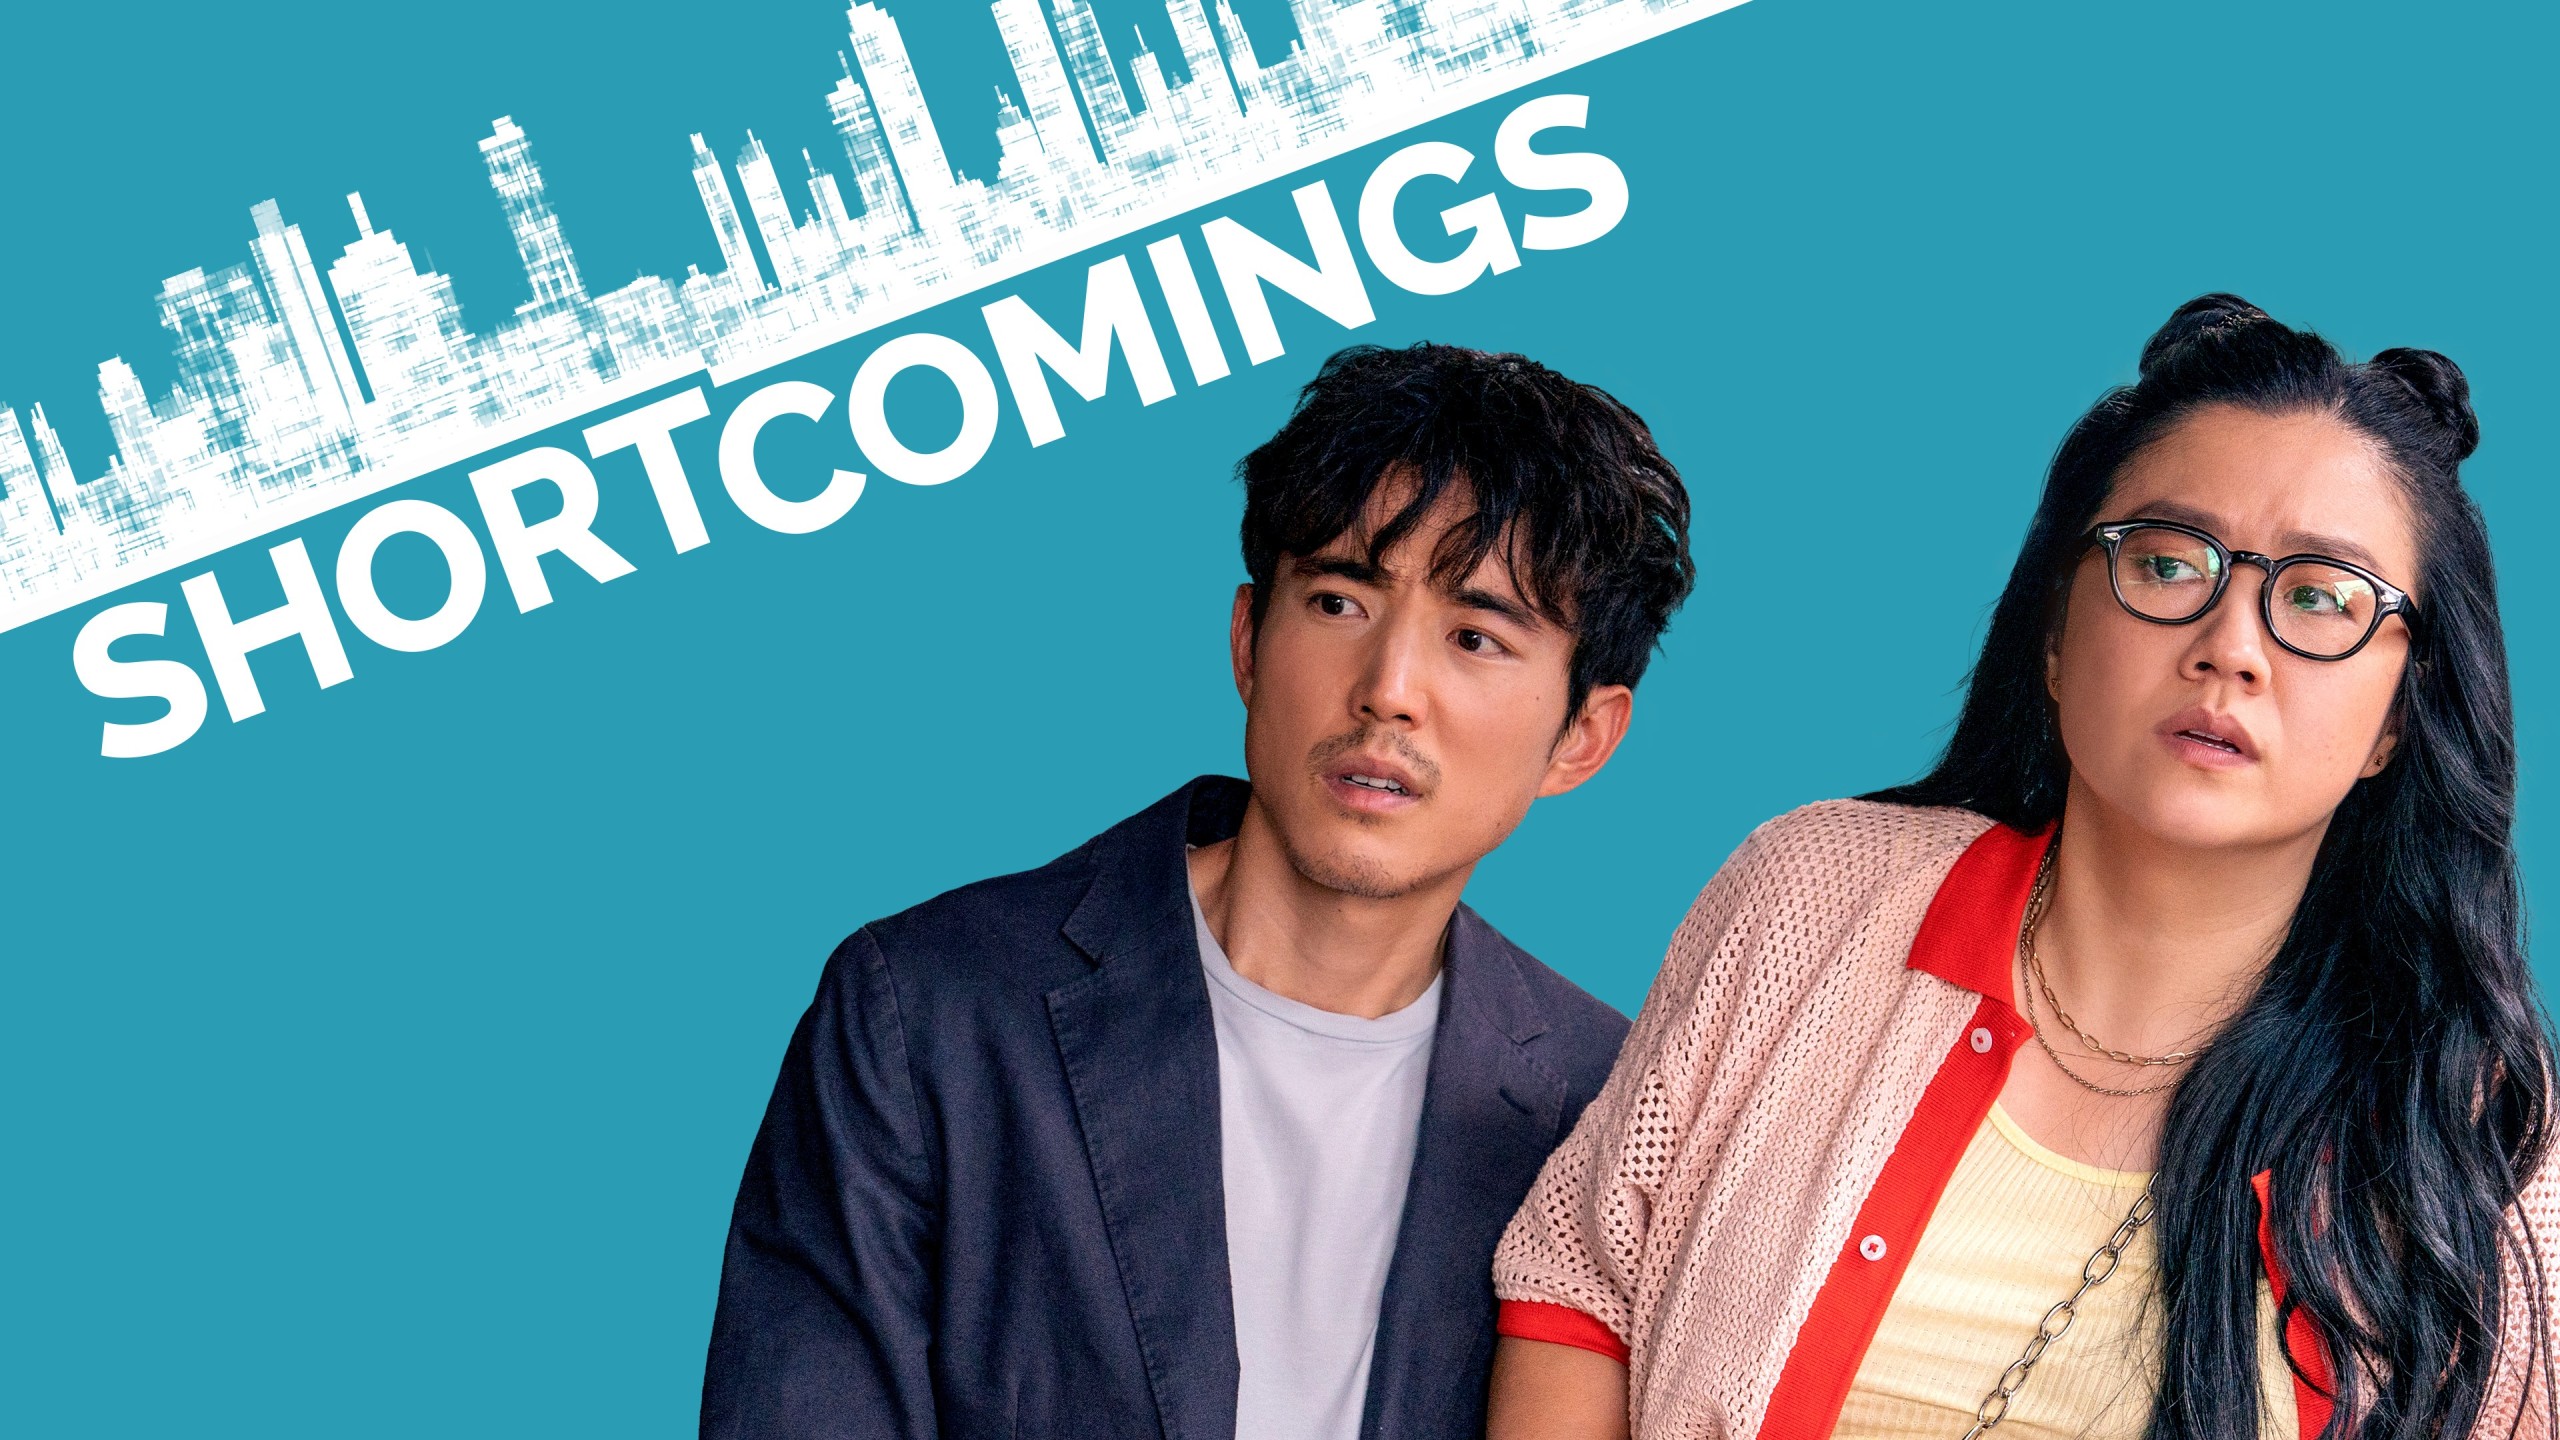 Shortcomings (2023) Review: Randall Park’s Directorial Debut Hits the Mark